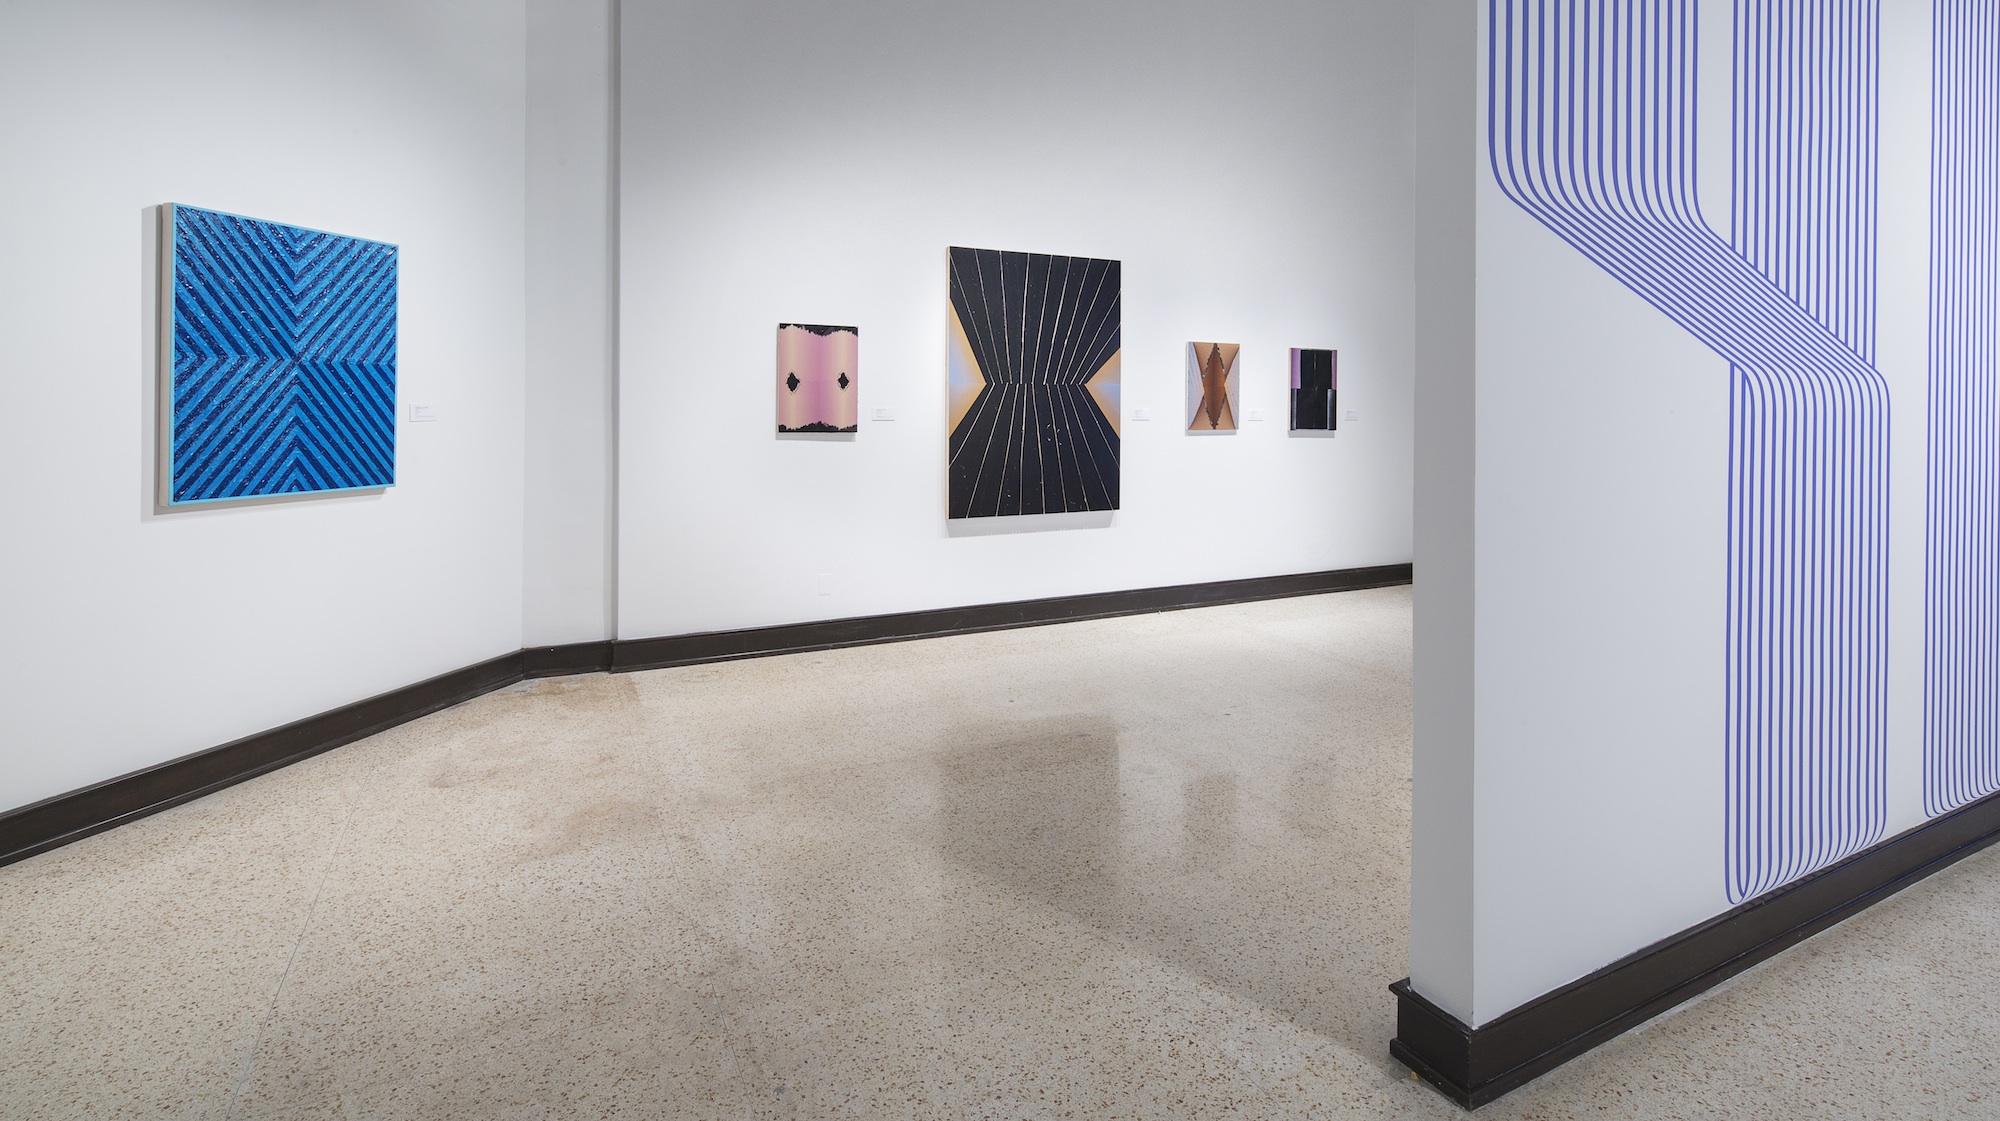  Russell Tyler (left), Rafael Vega (center), Terry Taggerty (right).&nbsp; Linear Abstraction ,&nbsp;Gutstein Gallery, Savannah College of Art and Design, Savannah, Georgia. Courtesy of the Savannah College of Art and Design. 2015. Photo: Marc Newton